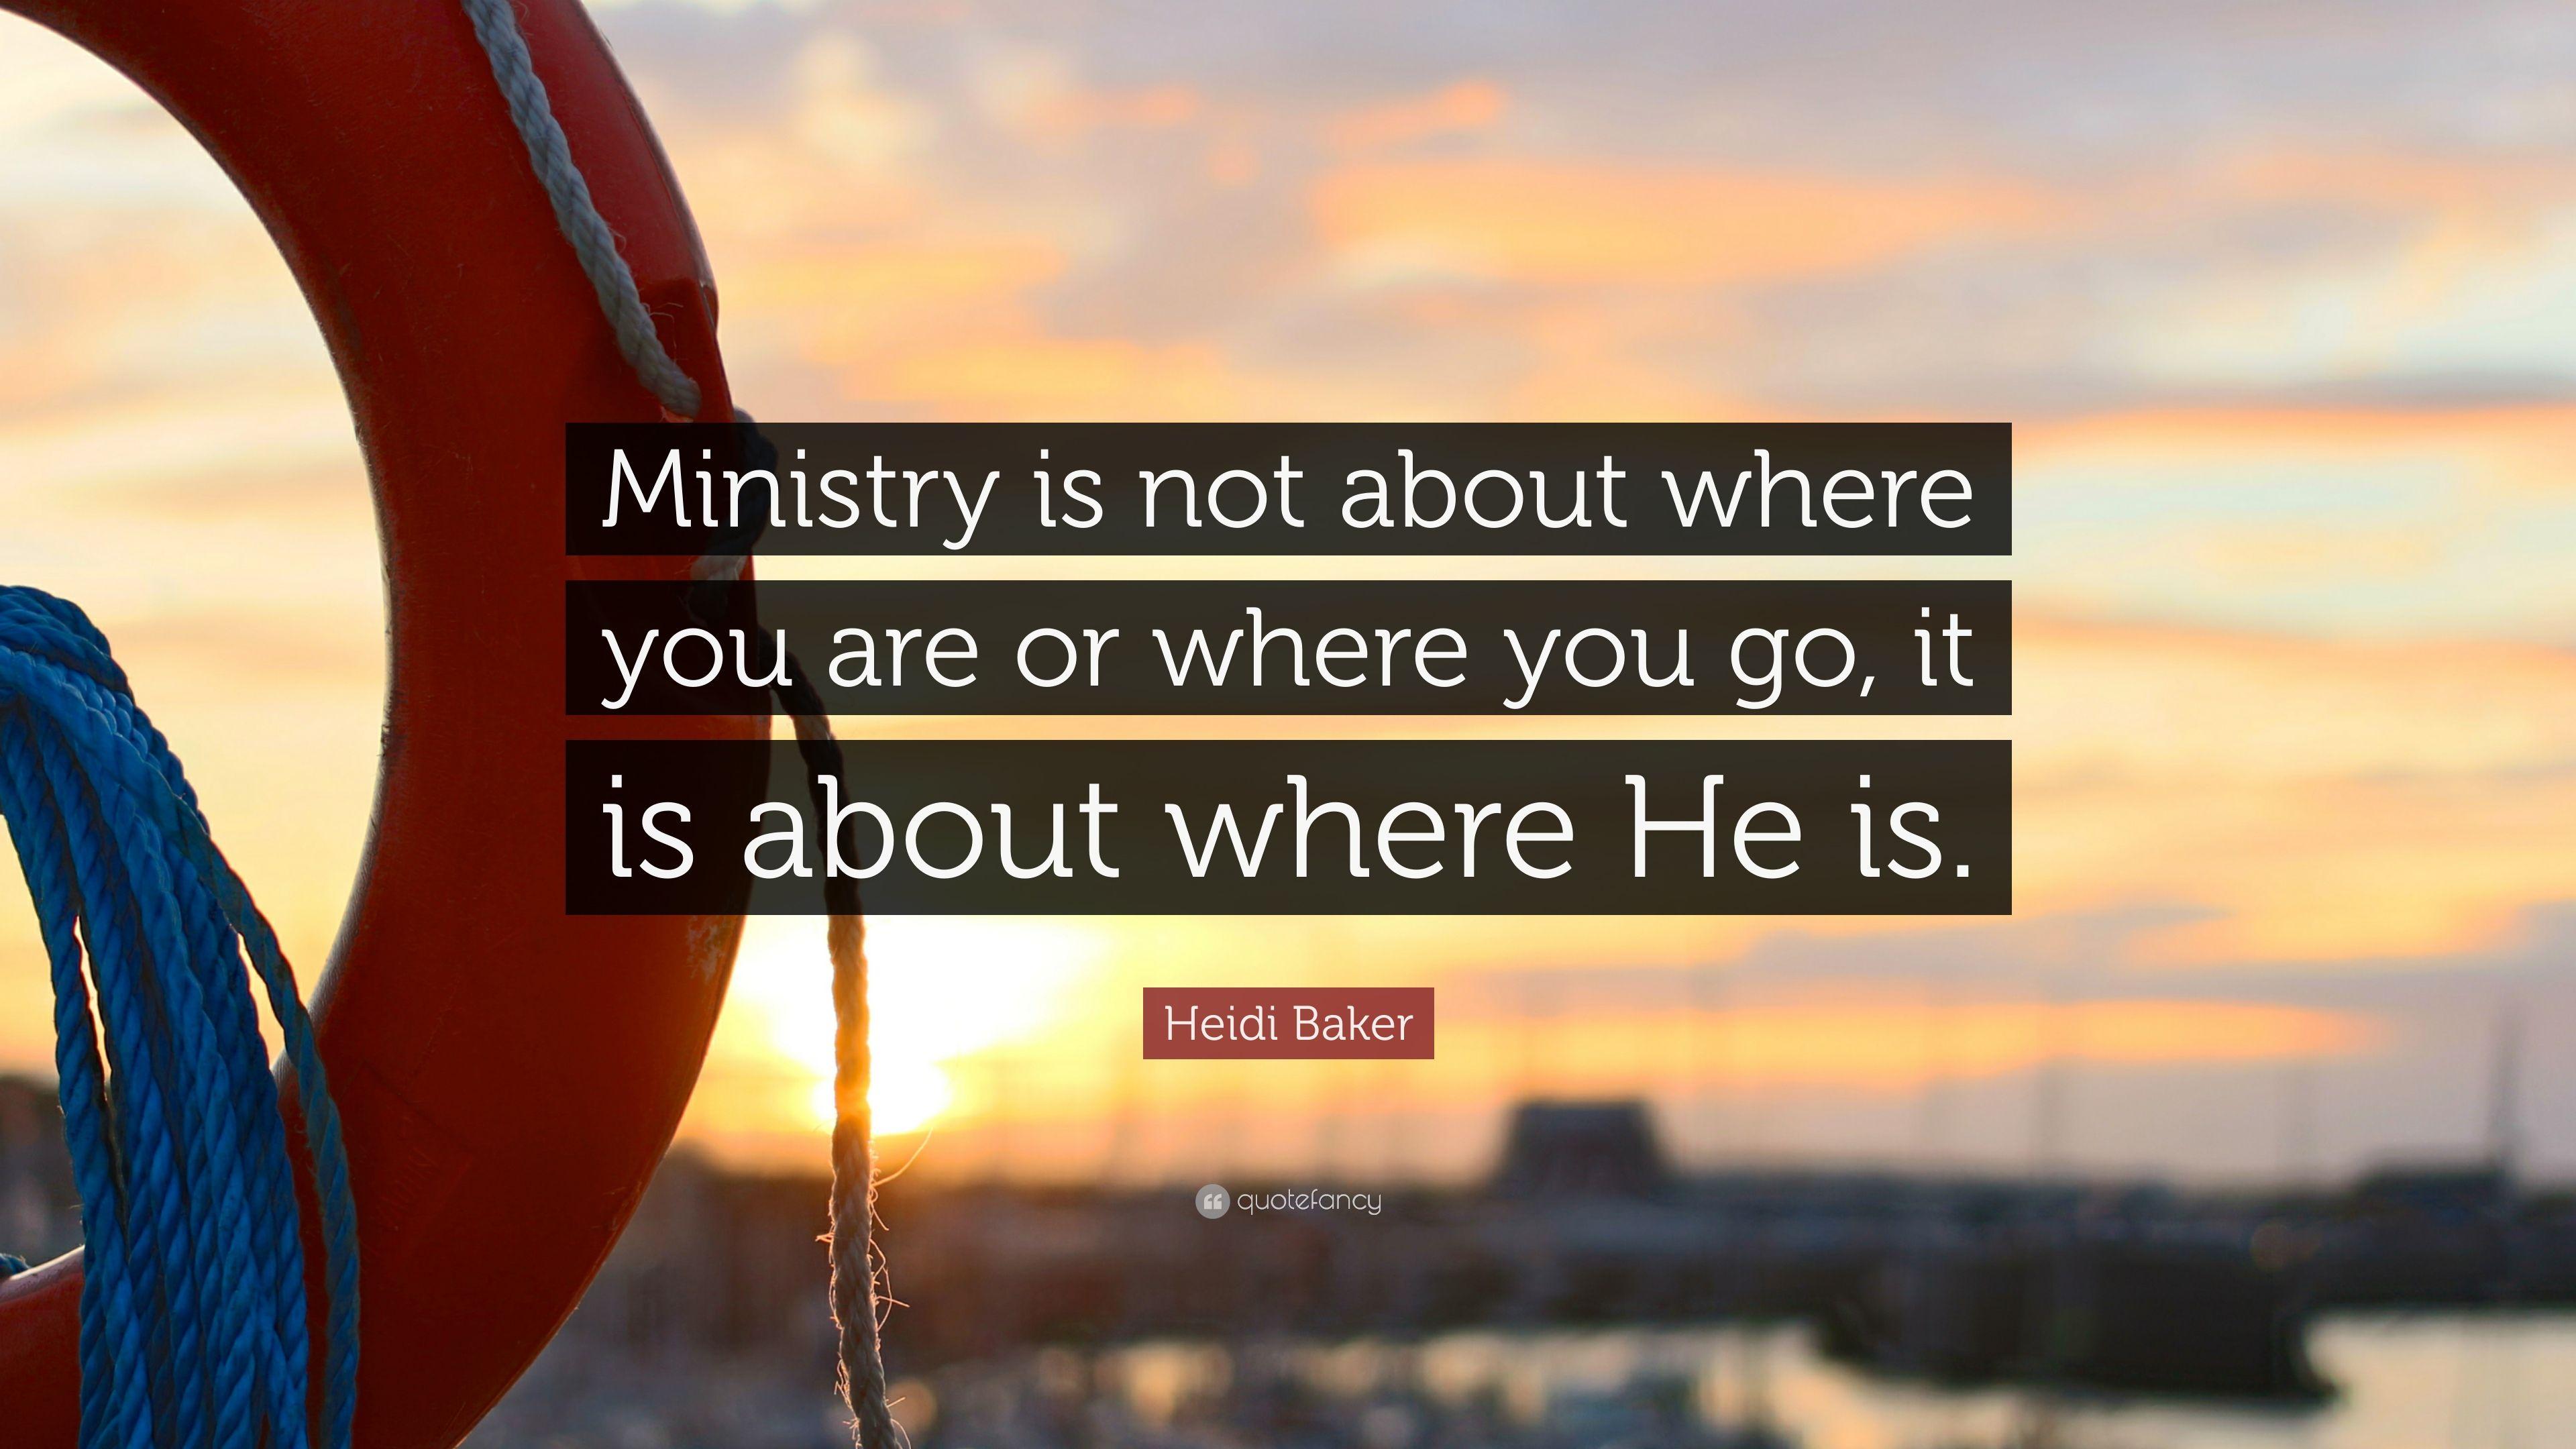 Heidi Baker Quote: “Ministry is not about where you are or where you